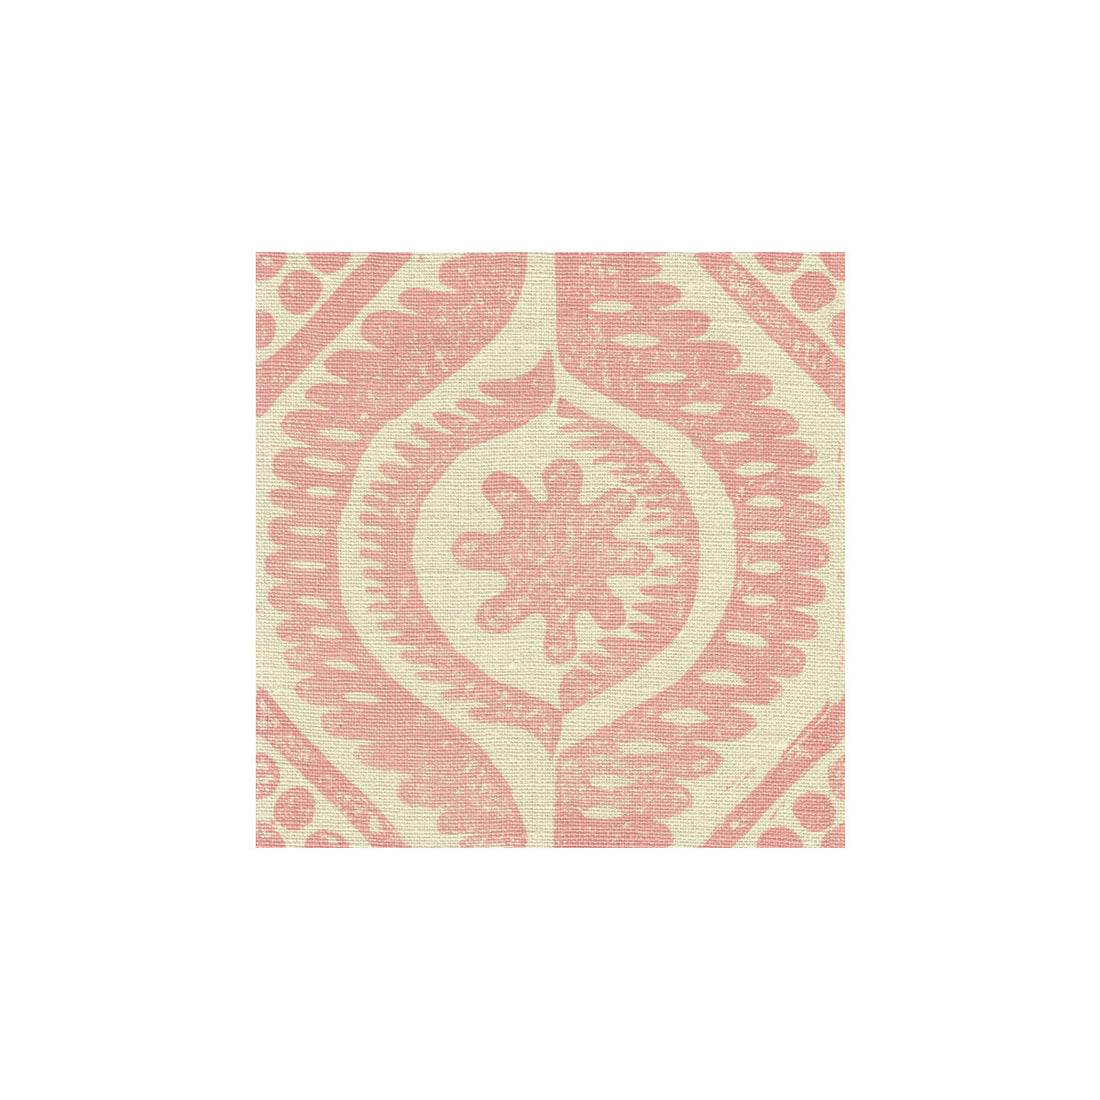 Damask fabric in pink color - pattern BFC-3518.17.0 - by Lee Jofa in the Blithfield collection